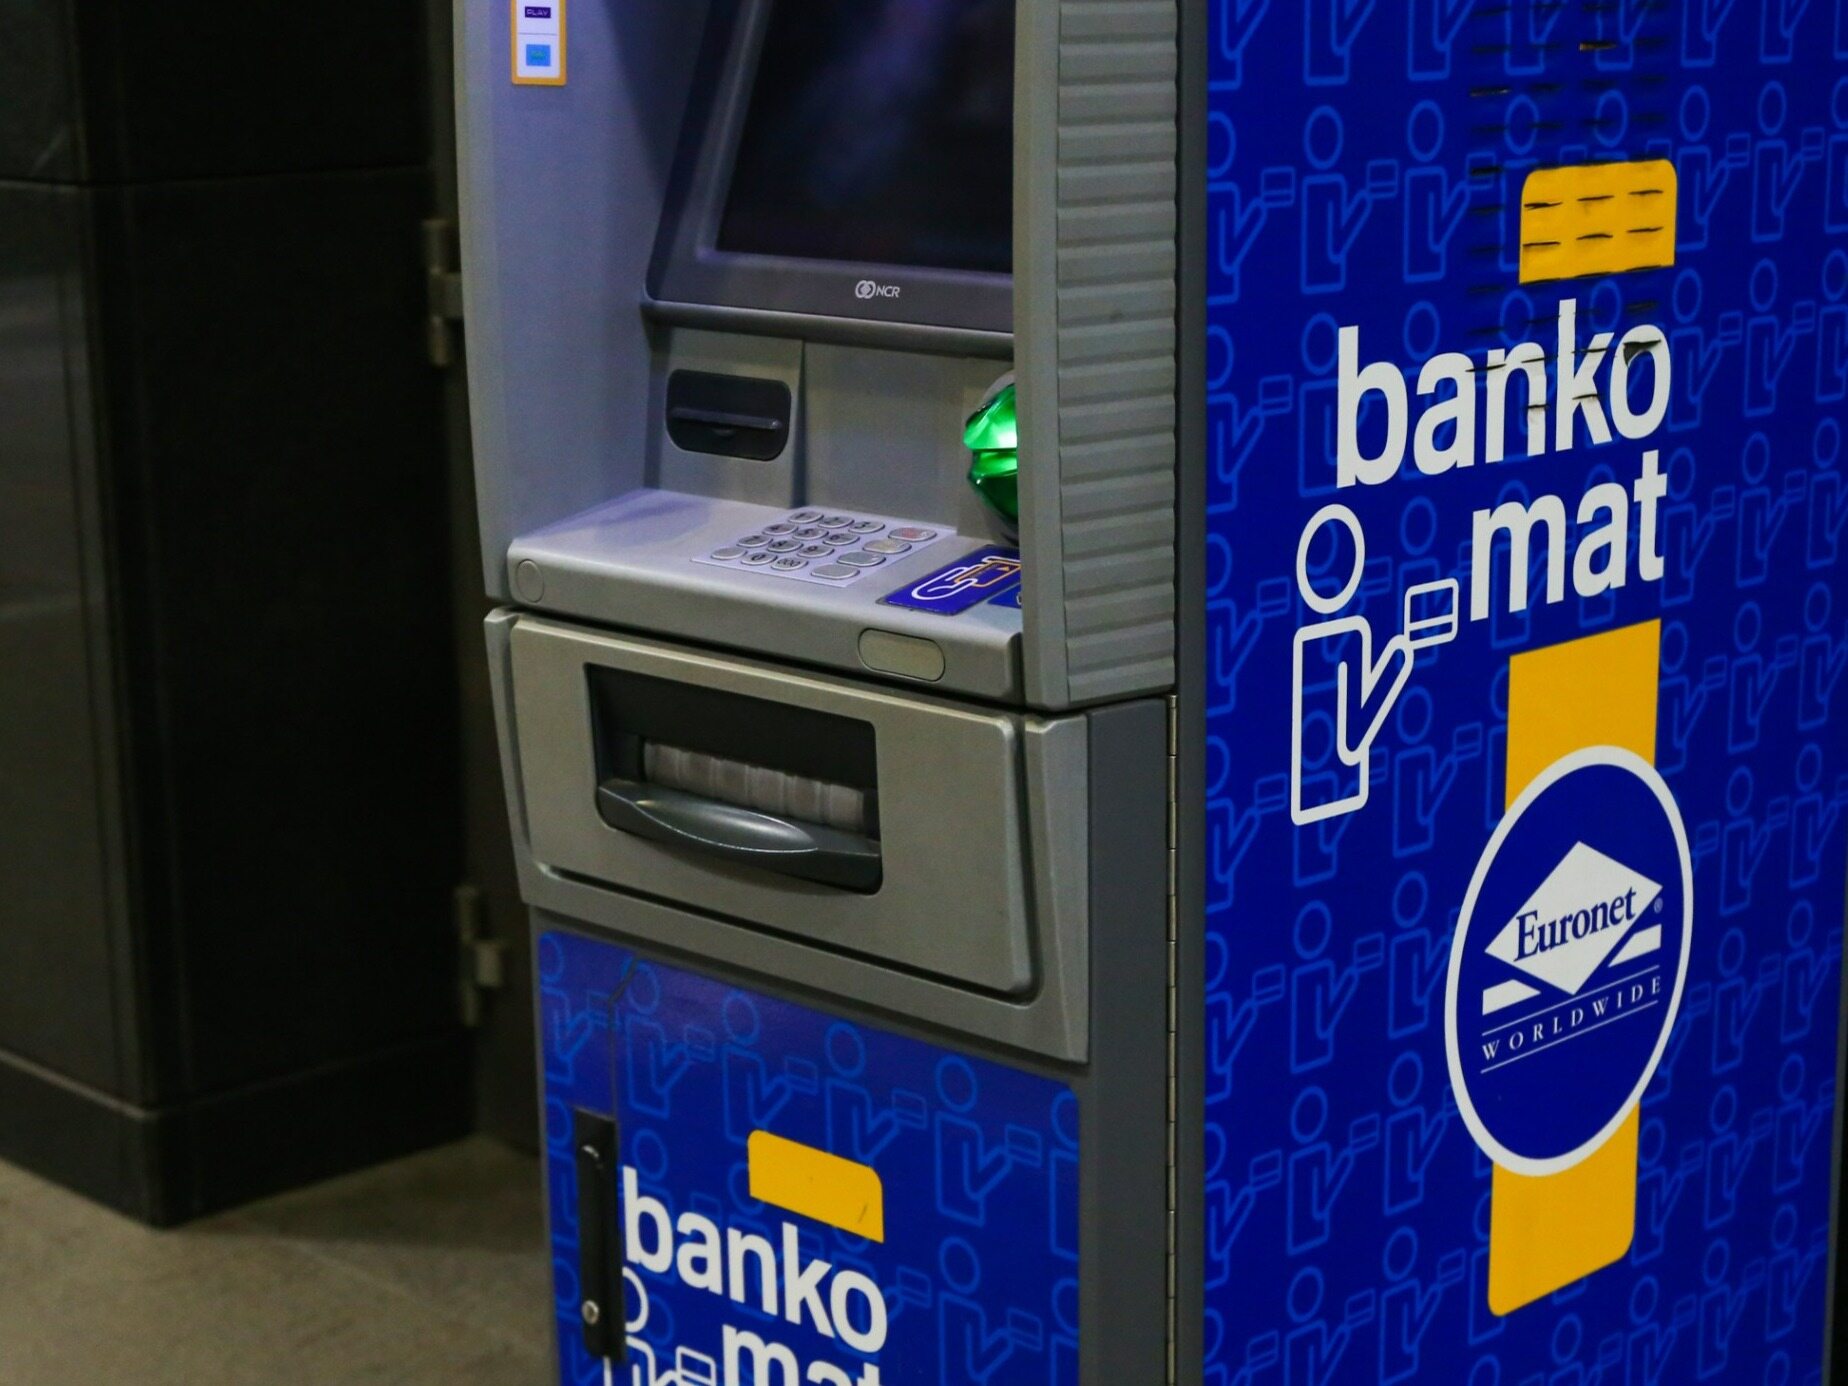 After the Euronet "strike", mBank has important news for customers